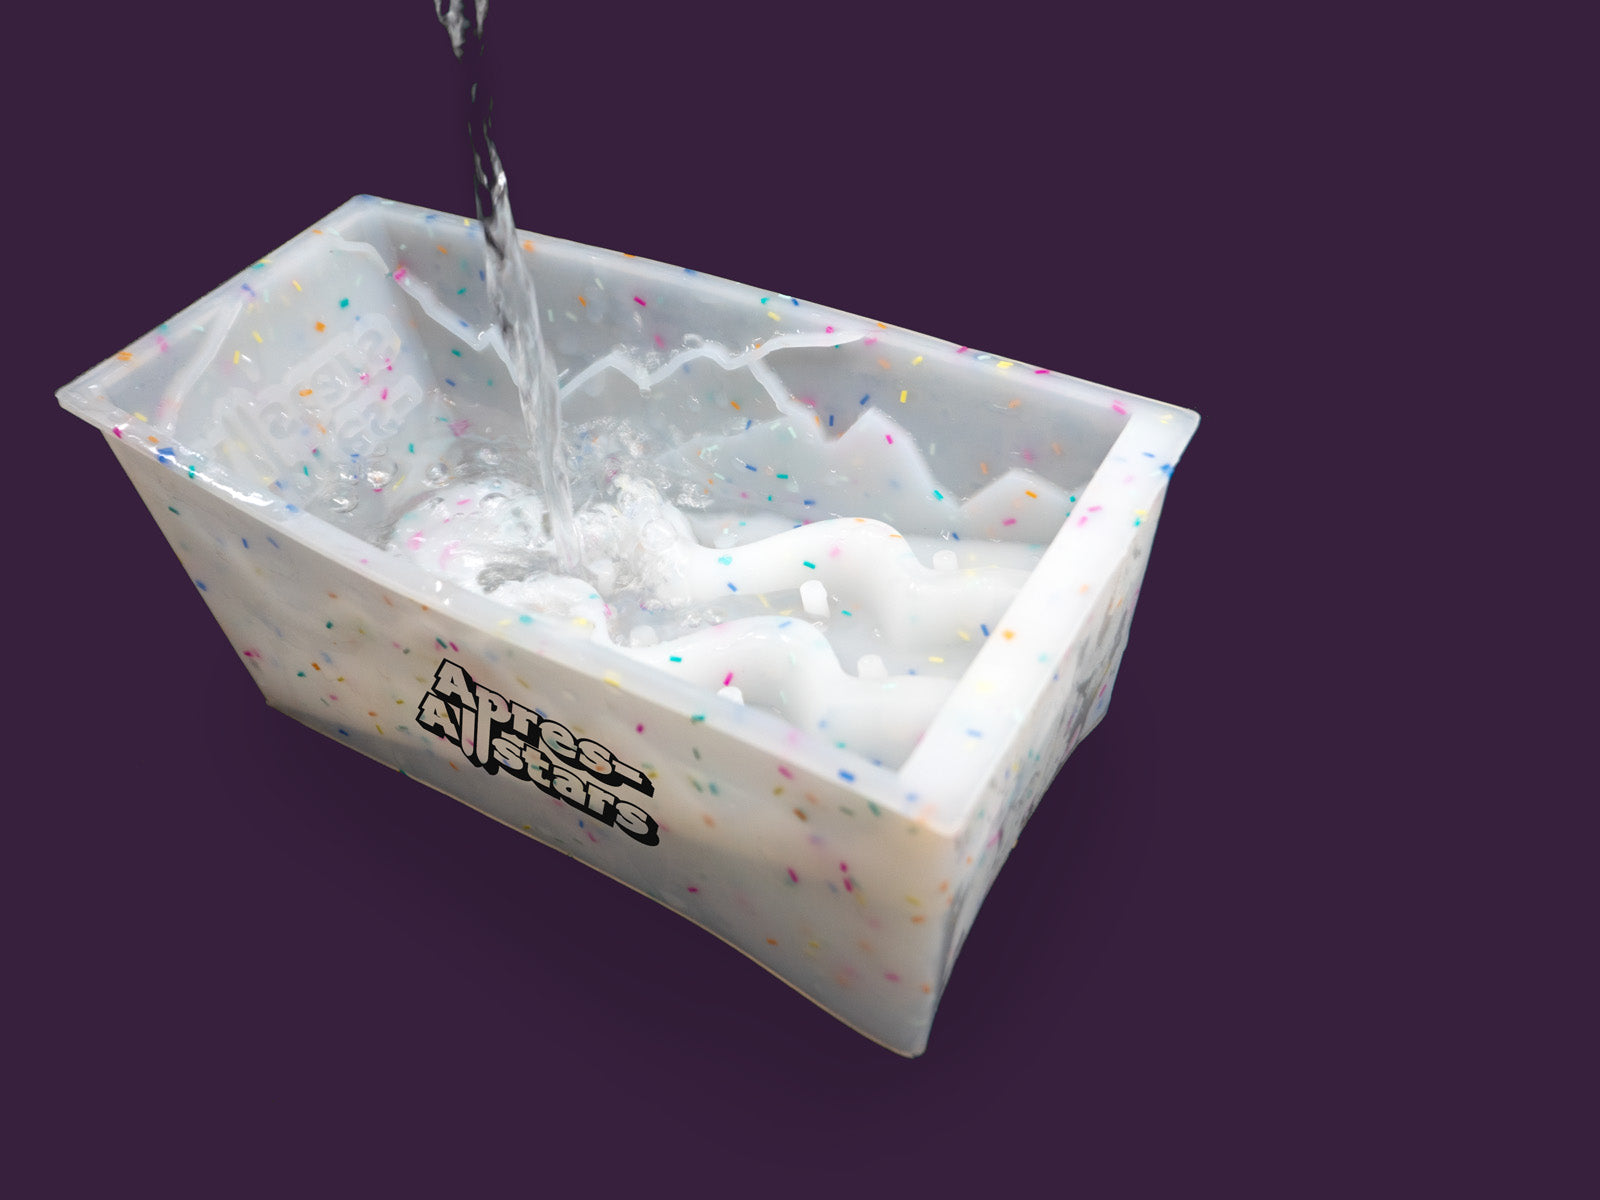 Photo of a white speckled plastic mould that water is being poured into. The image is set against a purple backdrop.